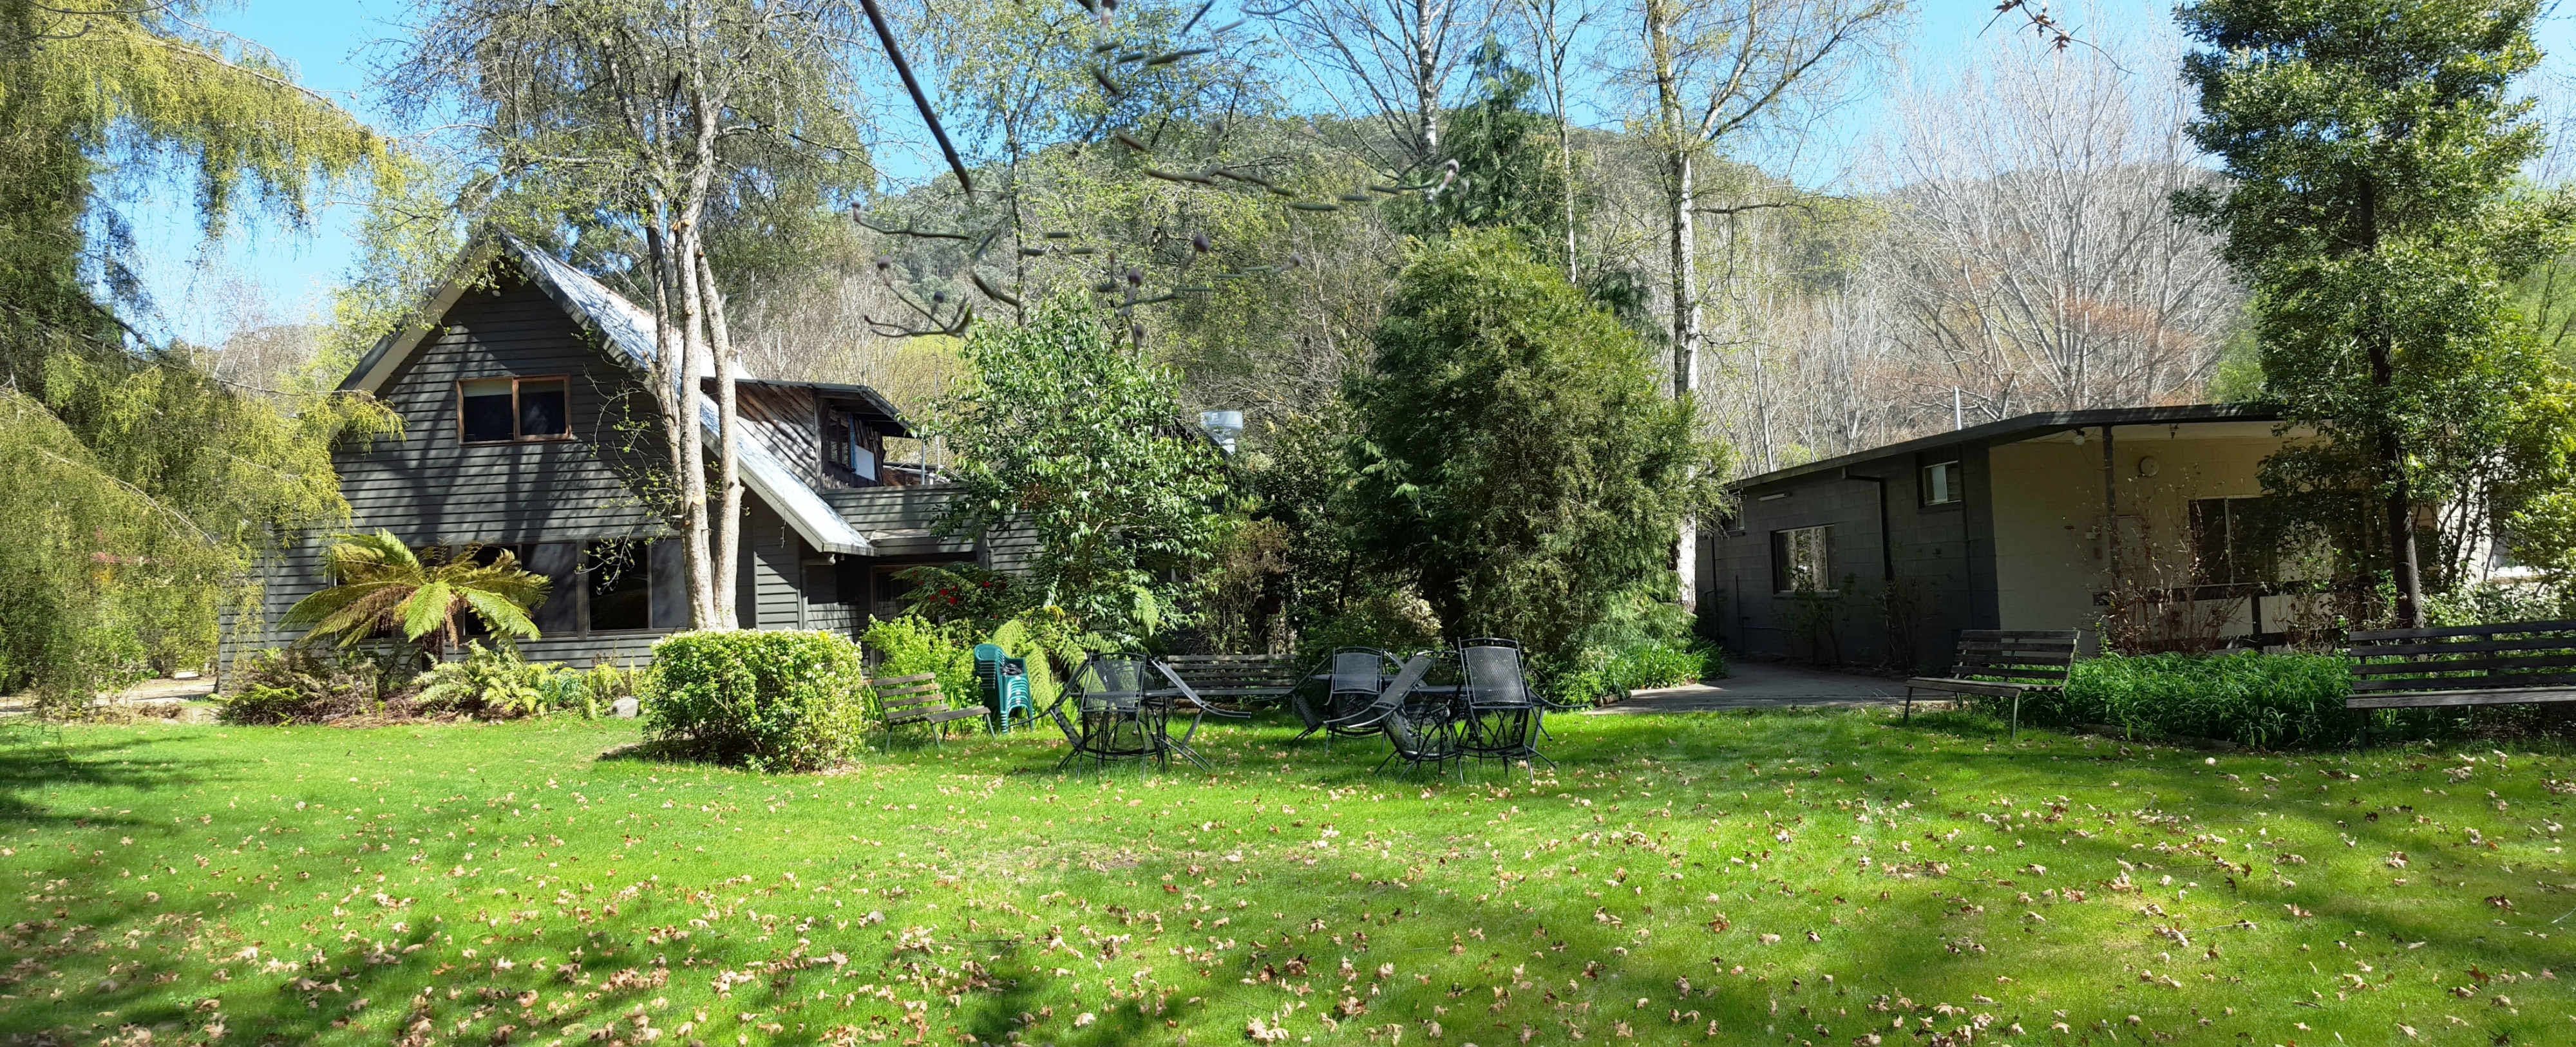 Mountain View Holiday Retreat - Accommodation Directory